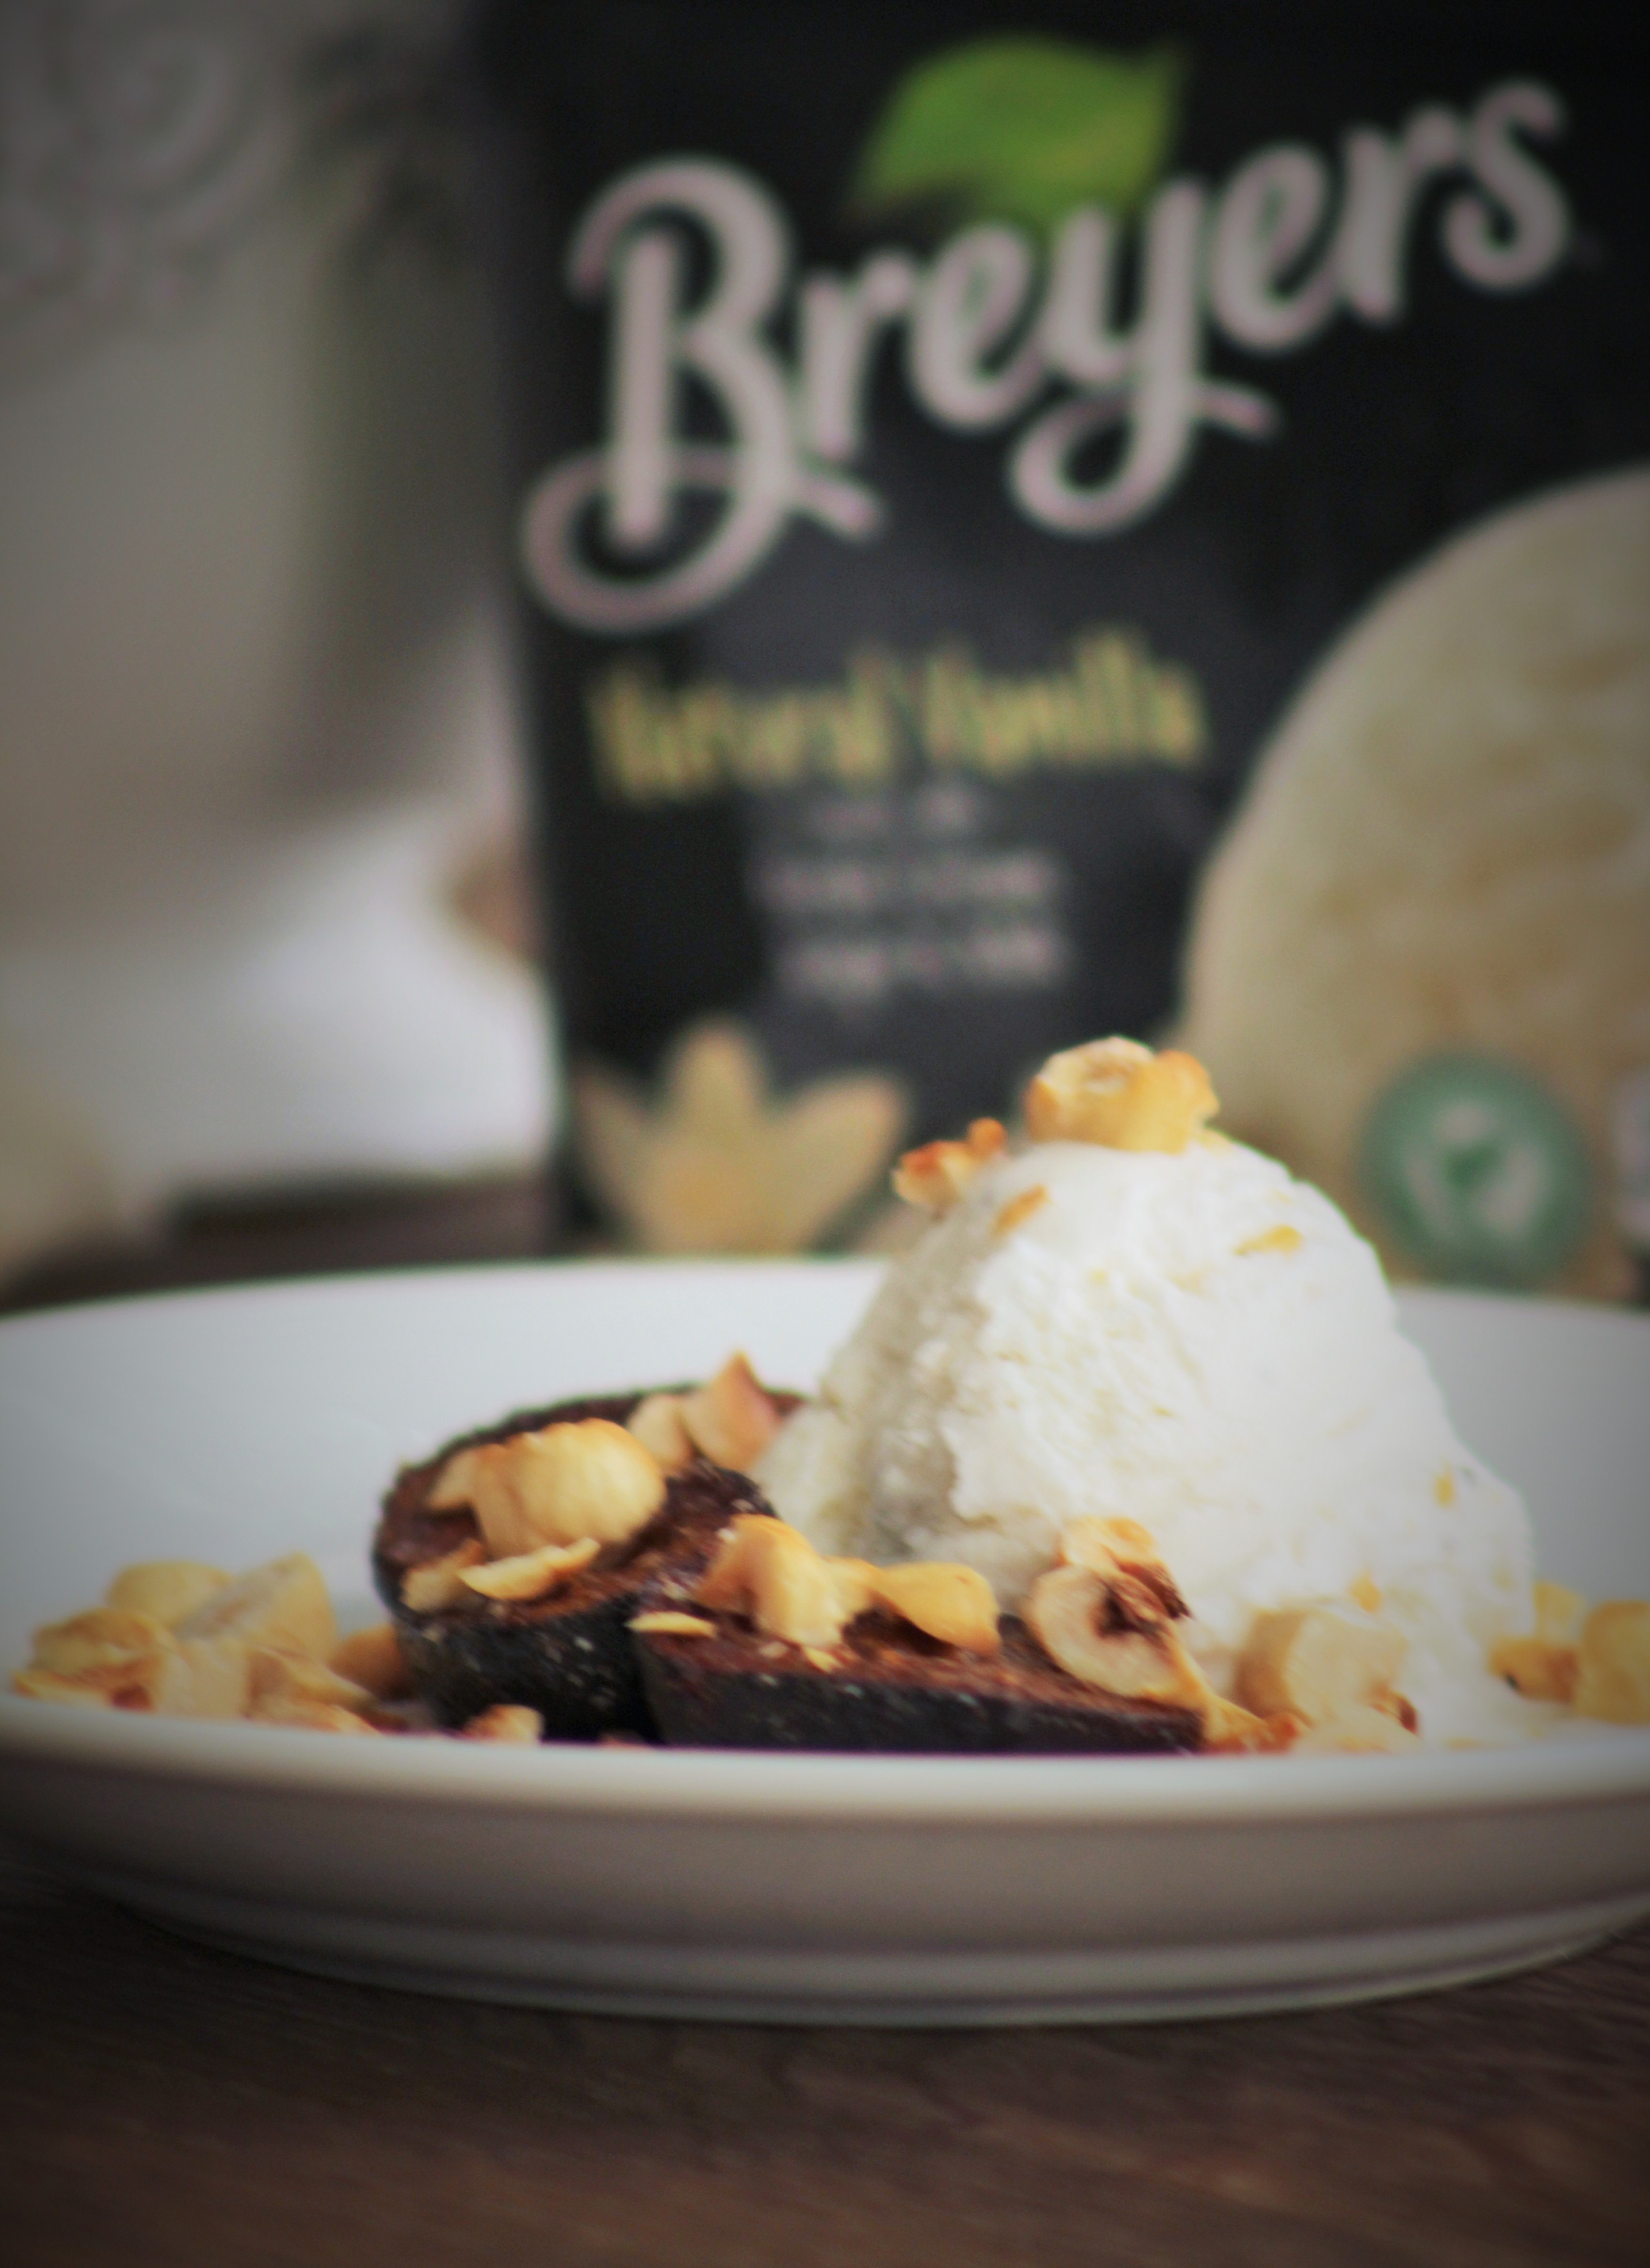 spice roasted figs with hazelnuts and vanilla ice cream